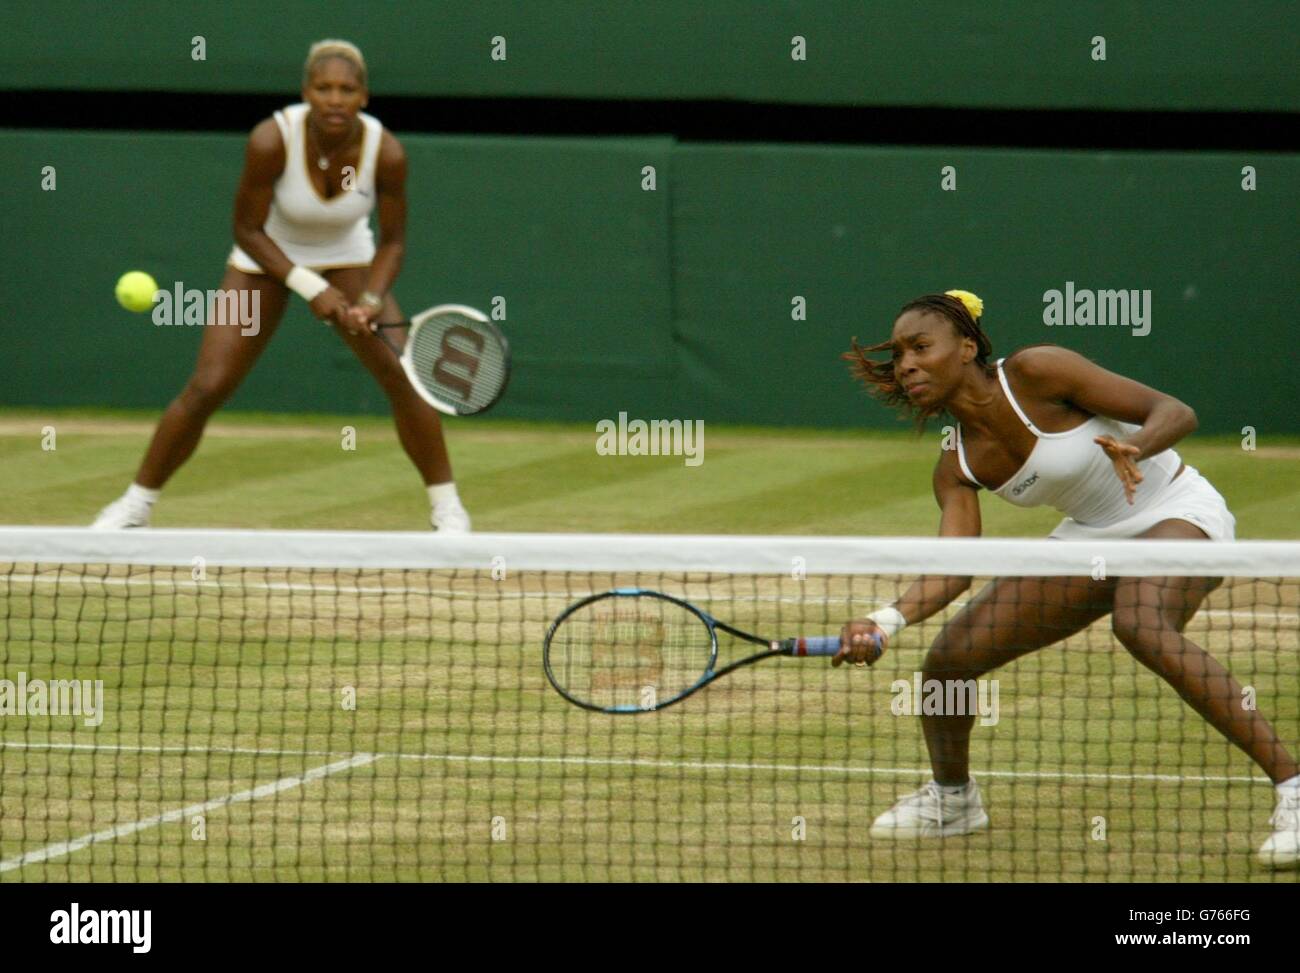 EDITORIAL USE ONLY, NO COMMERCIAL USE. Serena and Venus Williams from the USA in action in the Ladies' Doubles Final at Wimbledon which they won in straight sets 6:2/7:5 against Virgina Ruano Pascual from Spain and Paola Suarez. * of Argentina. The Williams sisters competed against each other in the Ladies' Singles Final yesterday, with Serena beating her older sister in straight sets. Stock Photo